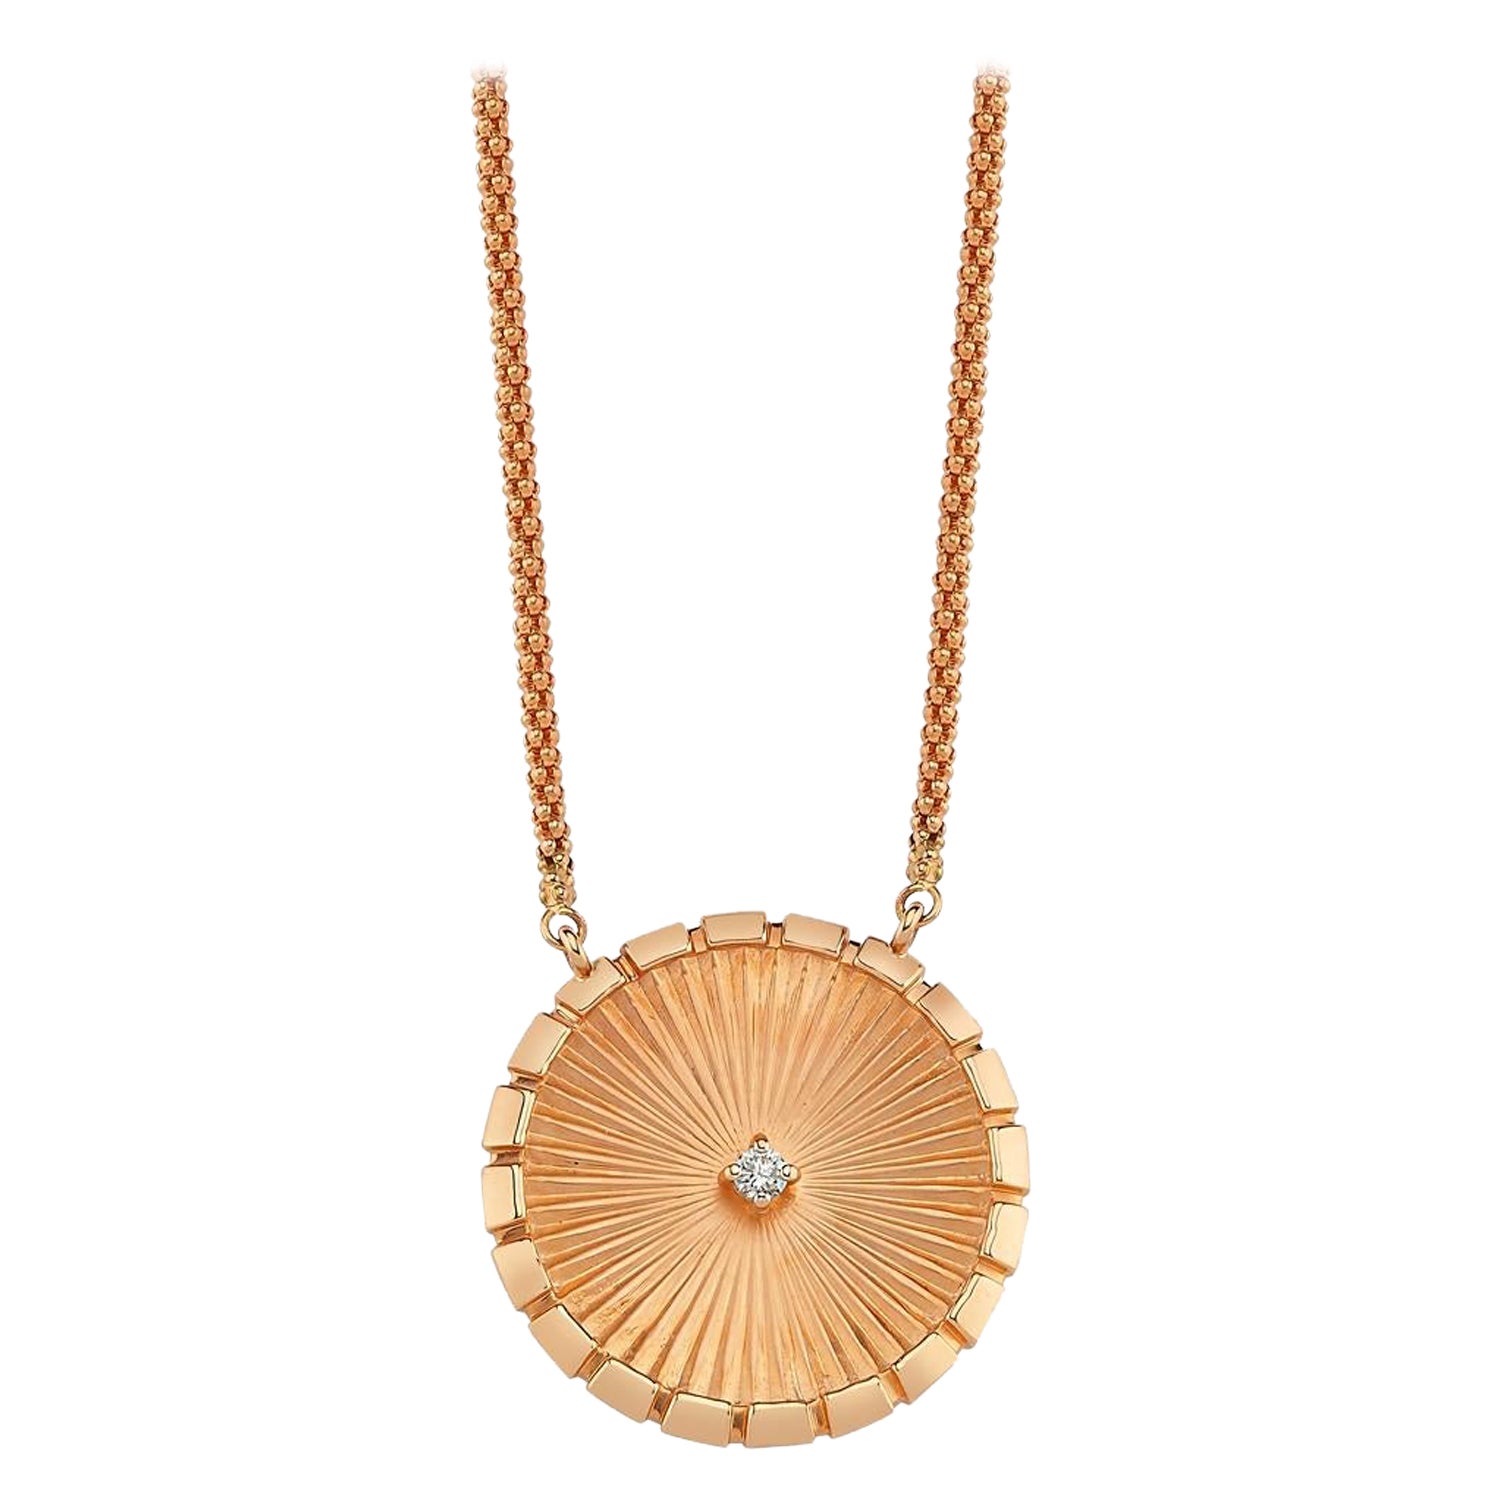 Kashchei Medallion Medium Necklace in 14K Rose Gold by Selda Jewellery For Sale